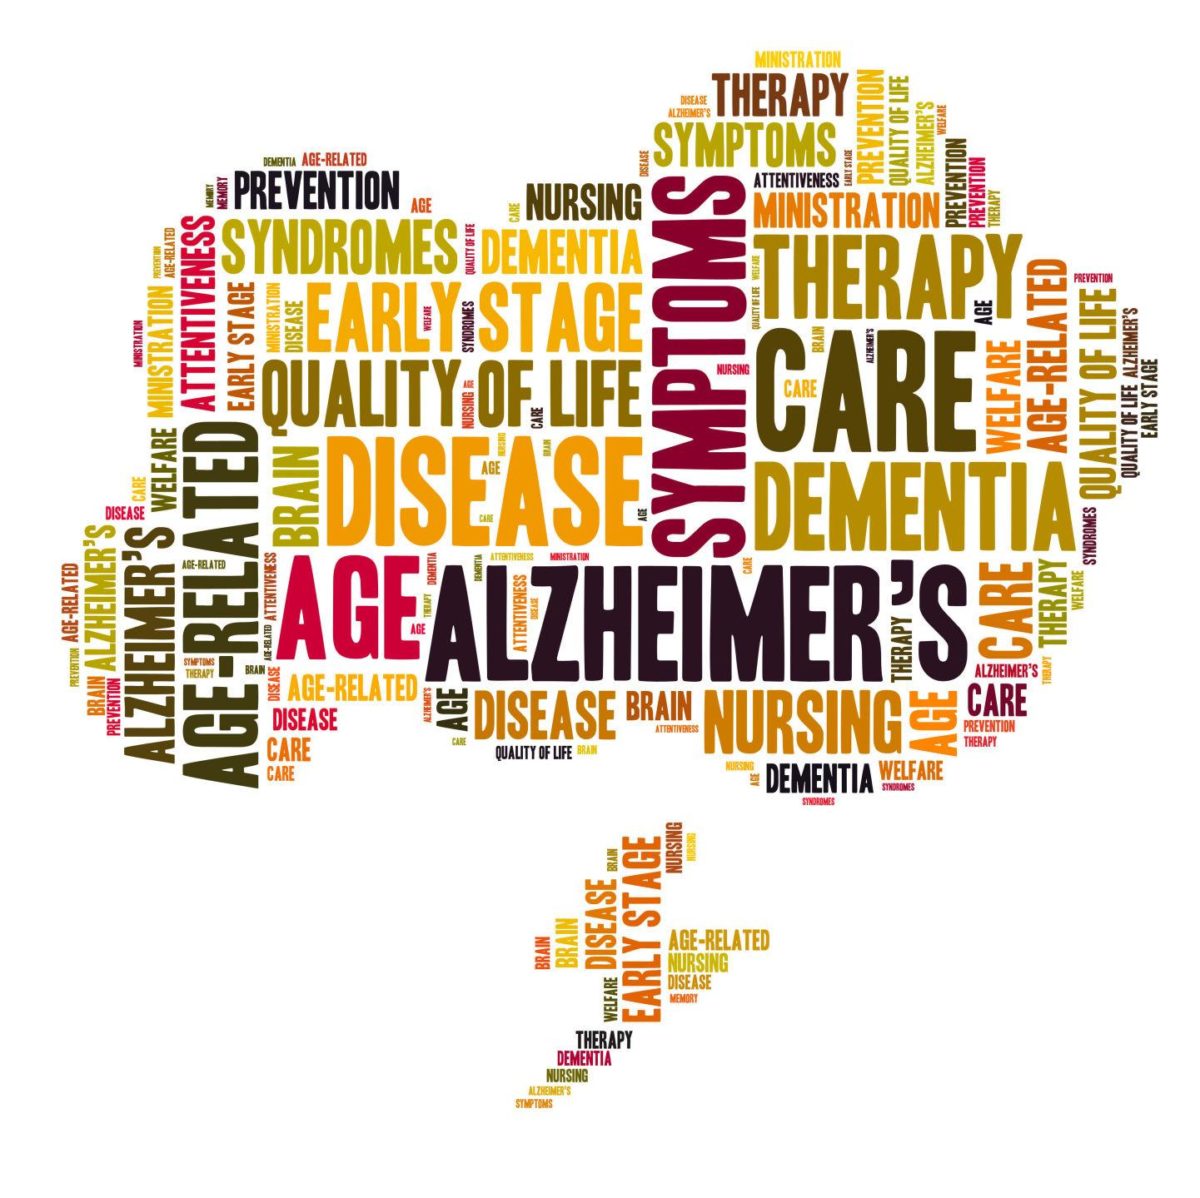 Alzheimers Q&A: Are certain parts of the brain more vulnerable to Alzheimer’s disease?